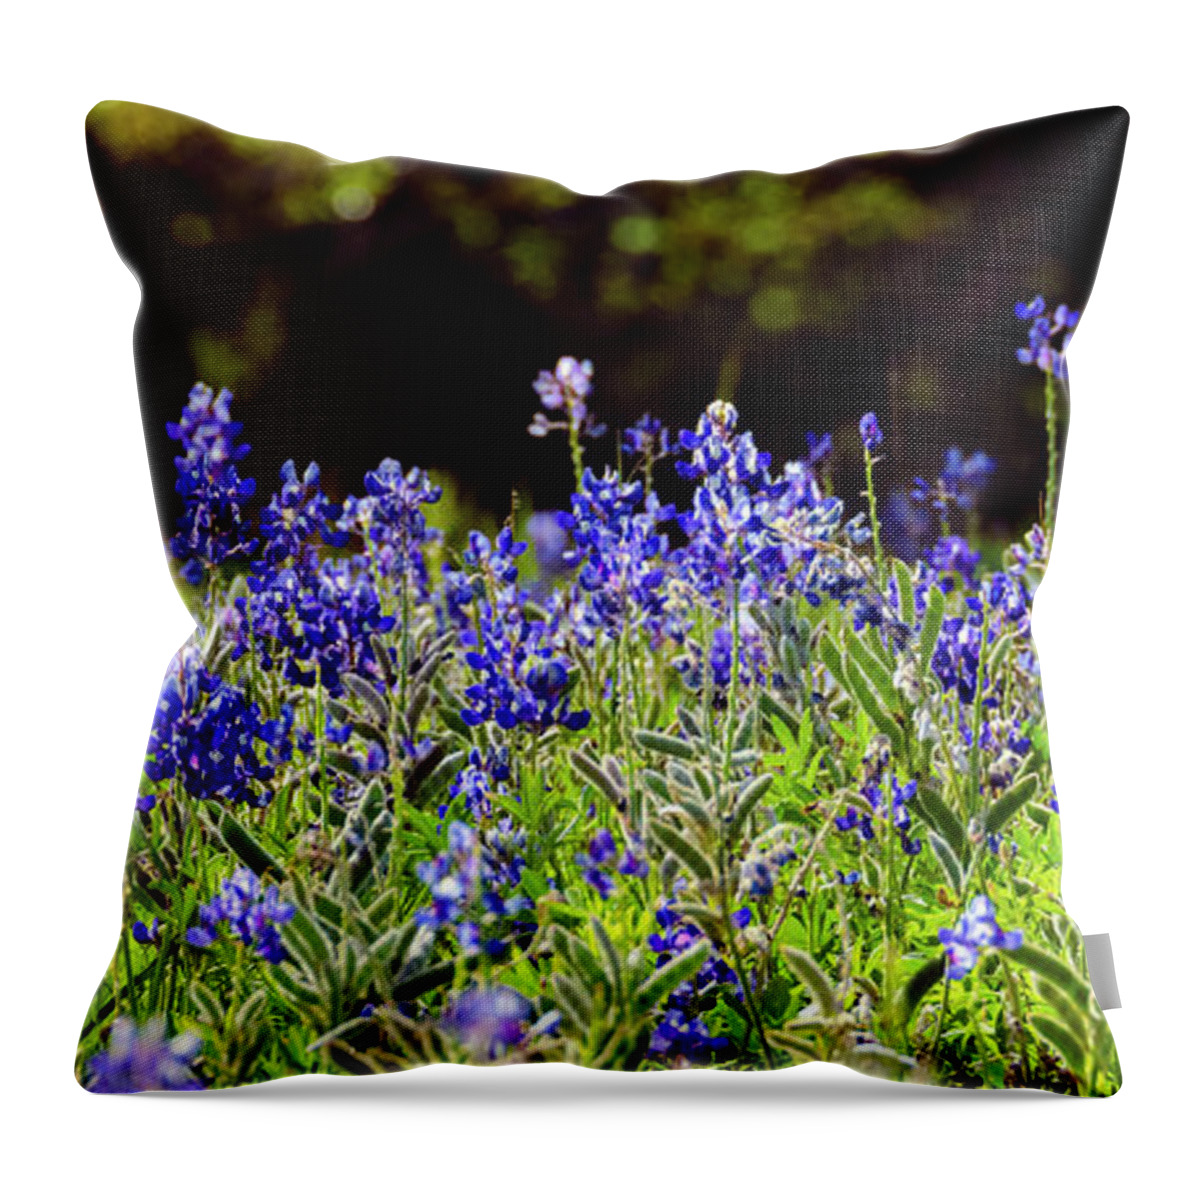 Texas Throw Pillow featuring the photograph Texas Bluebonnets III by Greg Reed